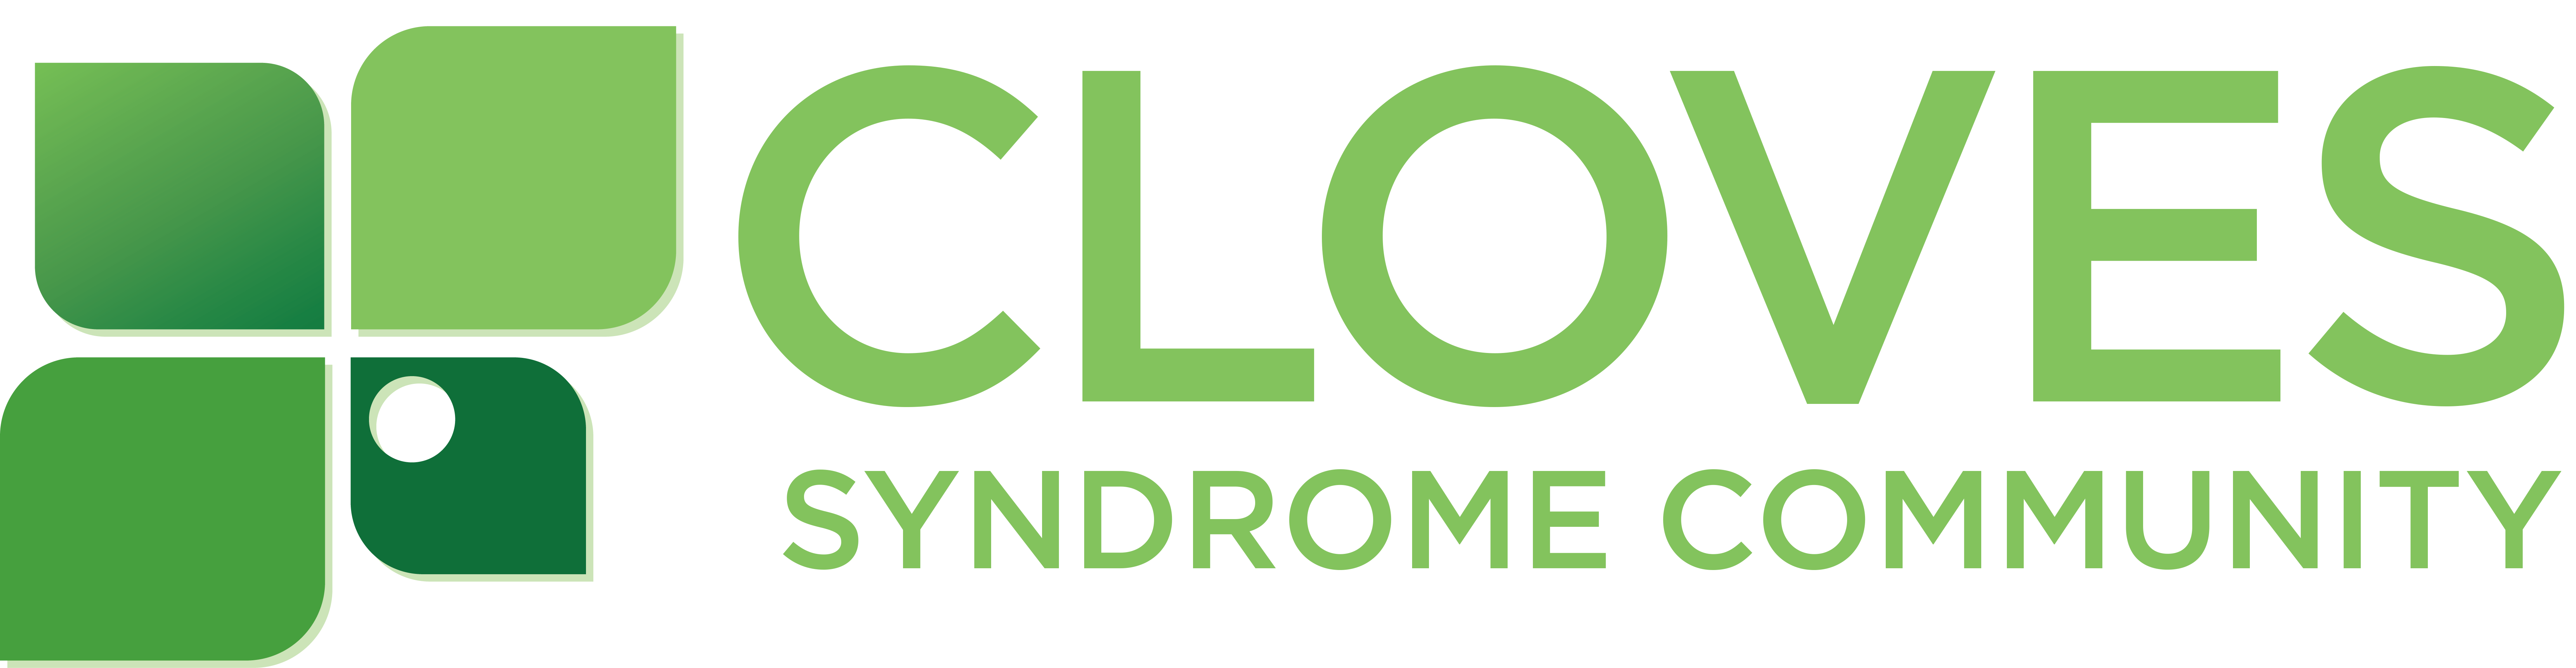 CLOVES Syndrome Community